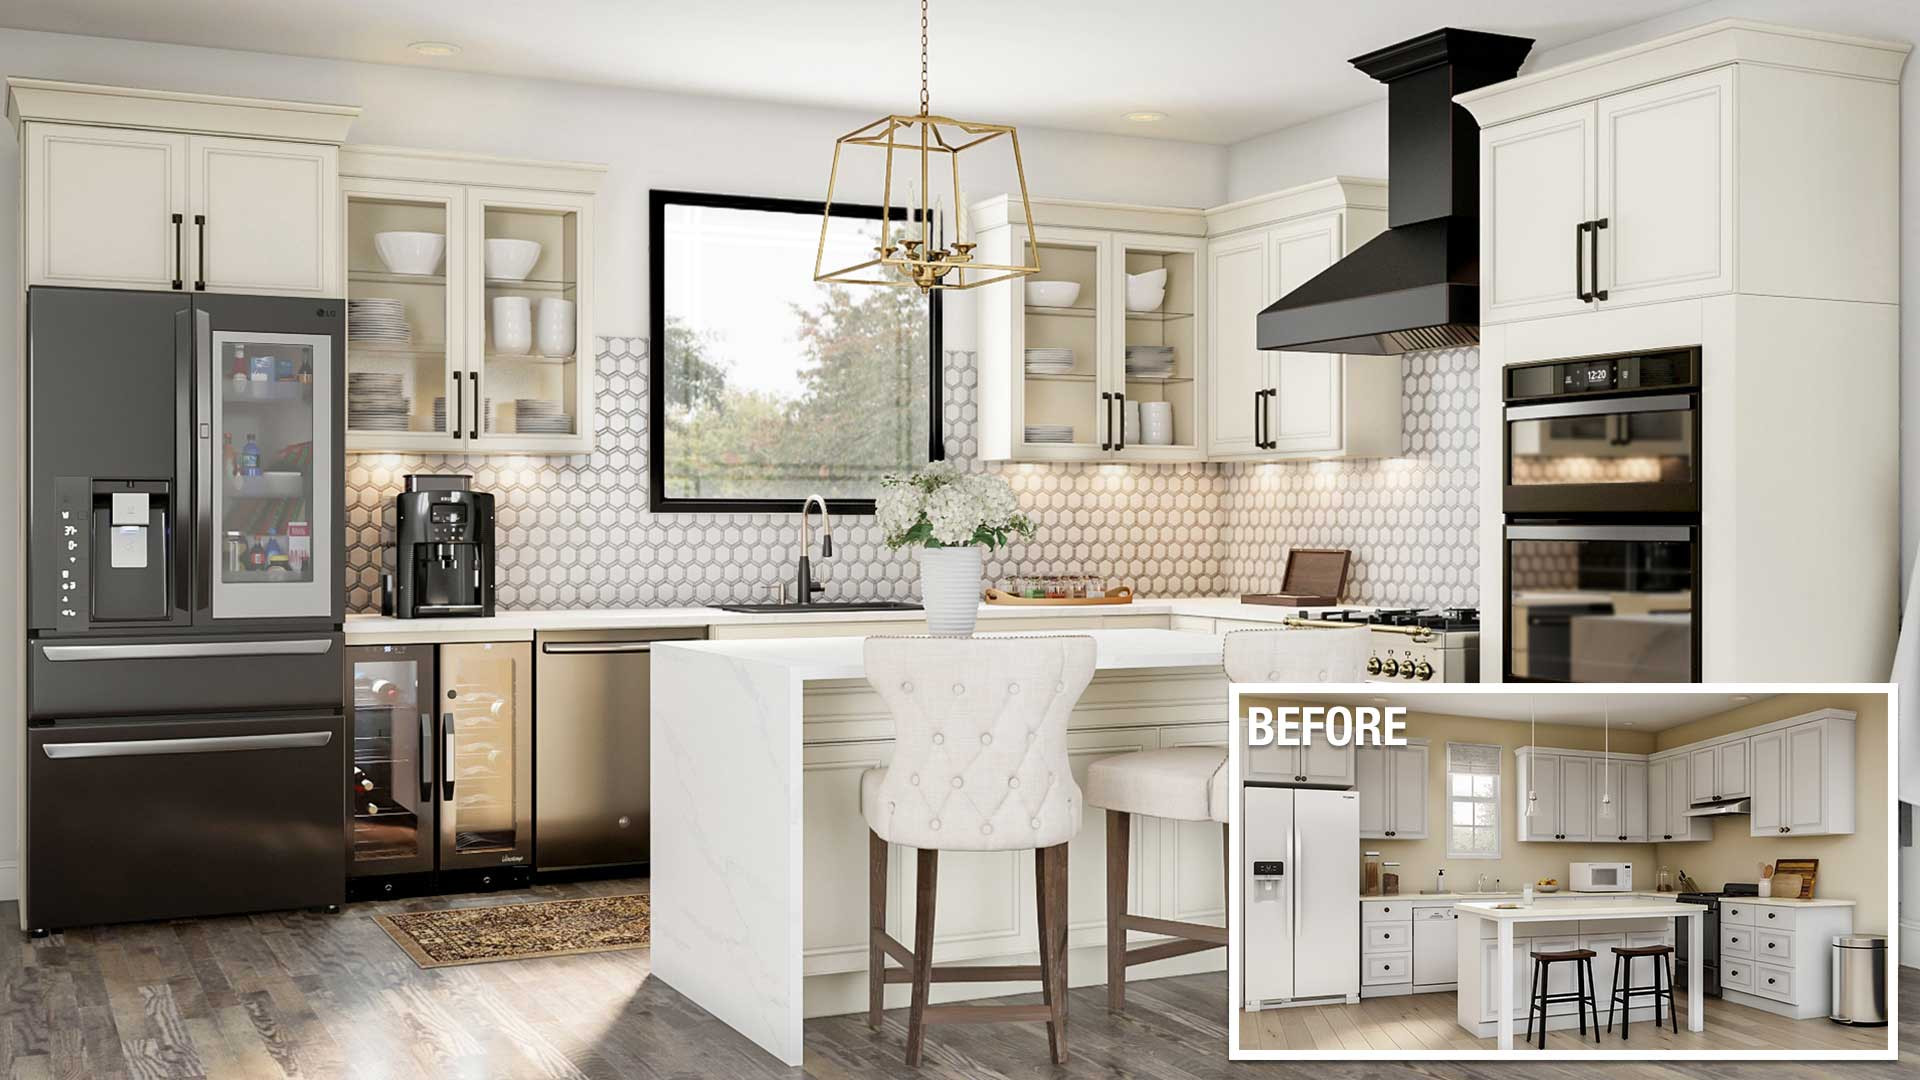 Remodel A Kitchen
 Cost to Remodel a Kitchen The Home Depot